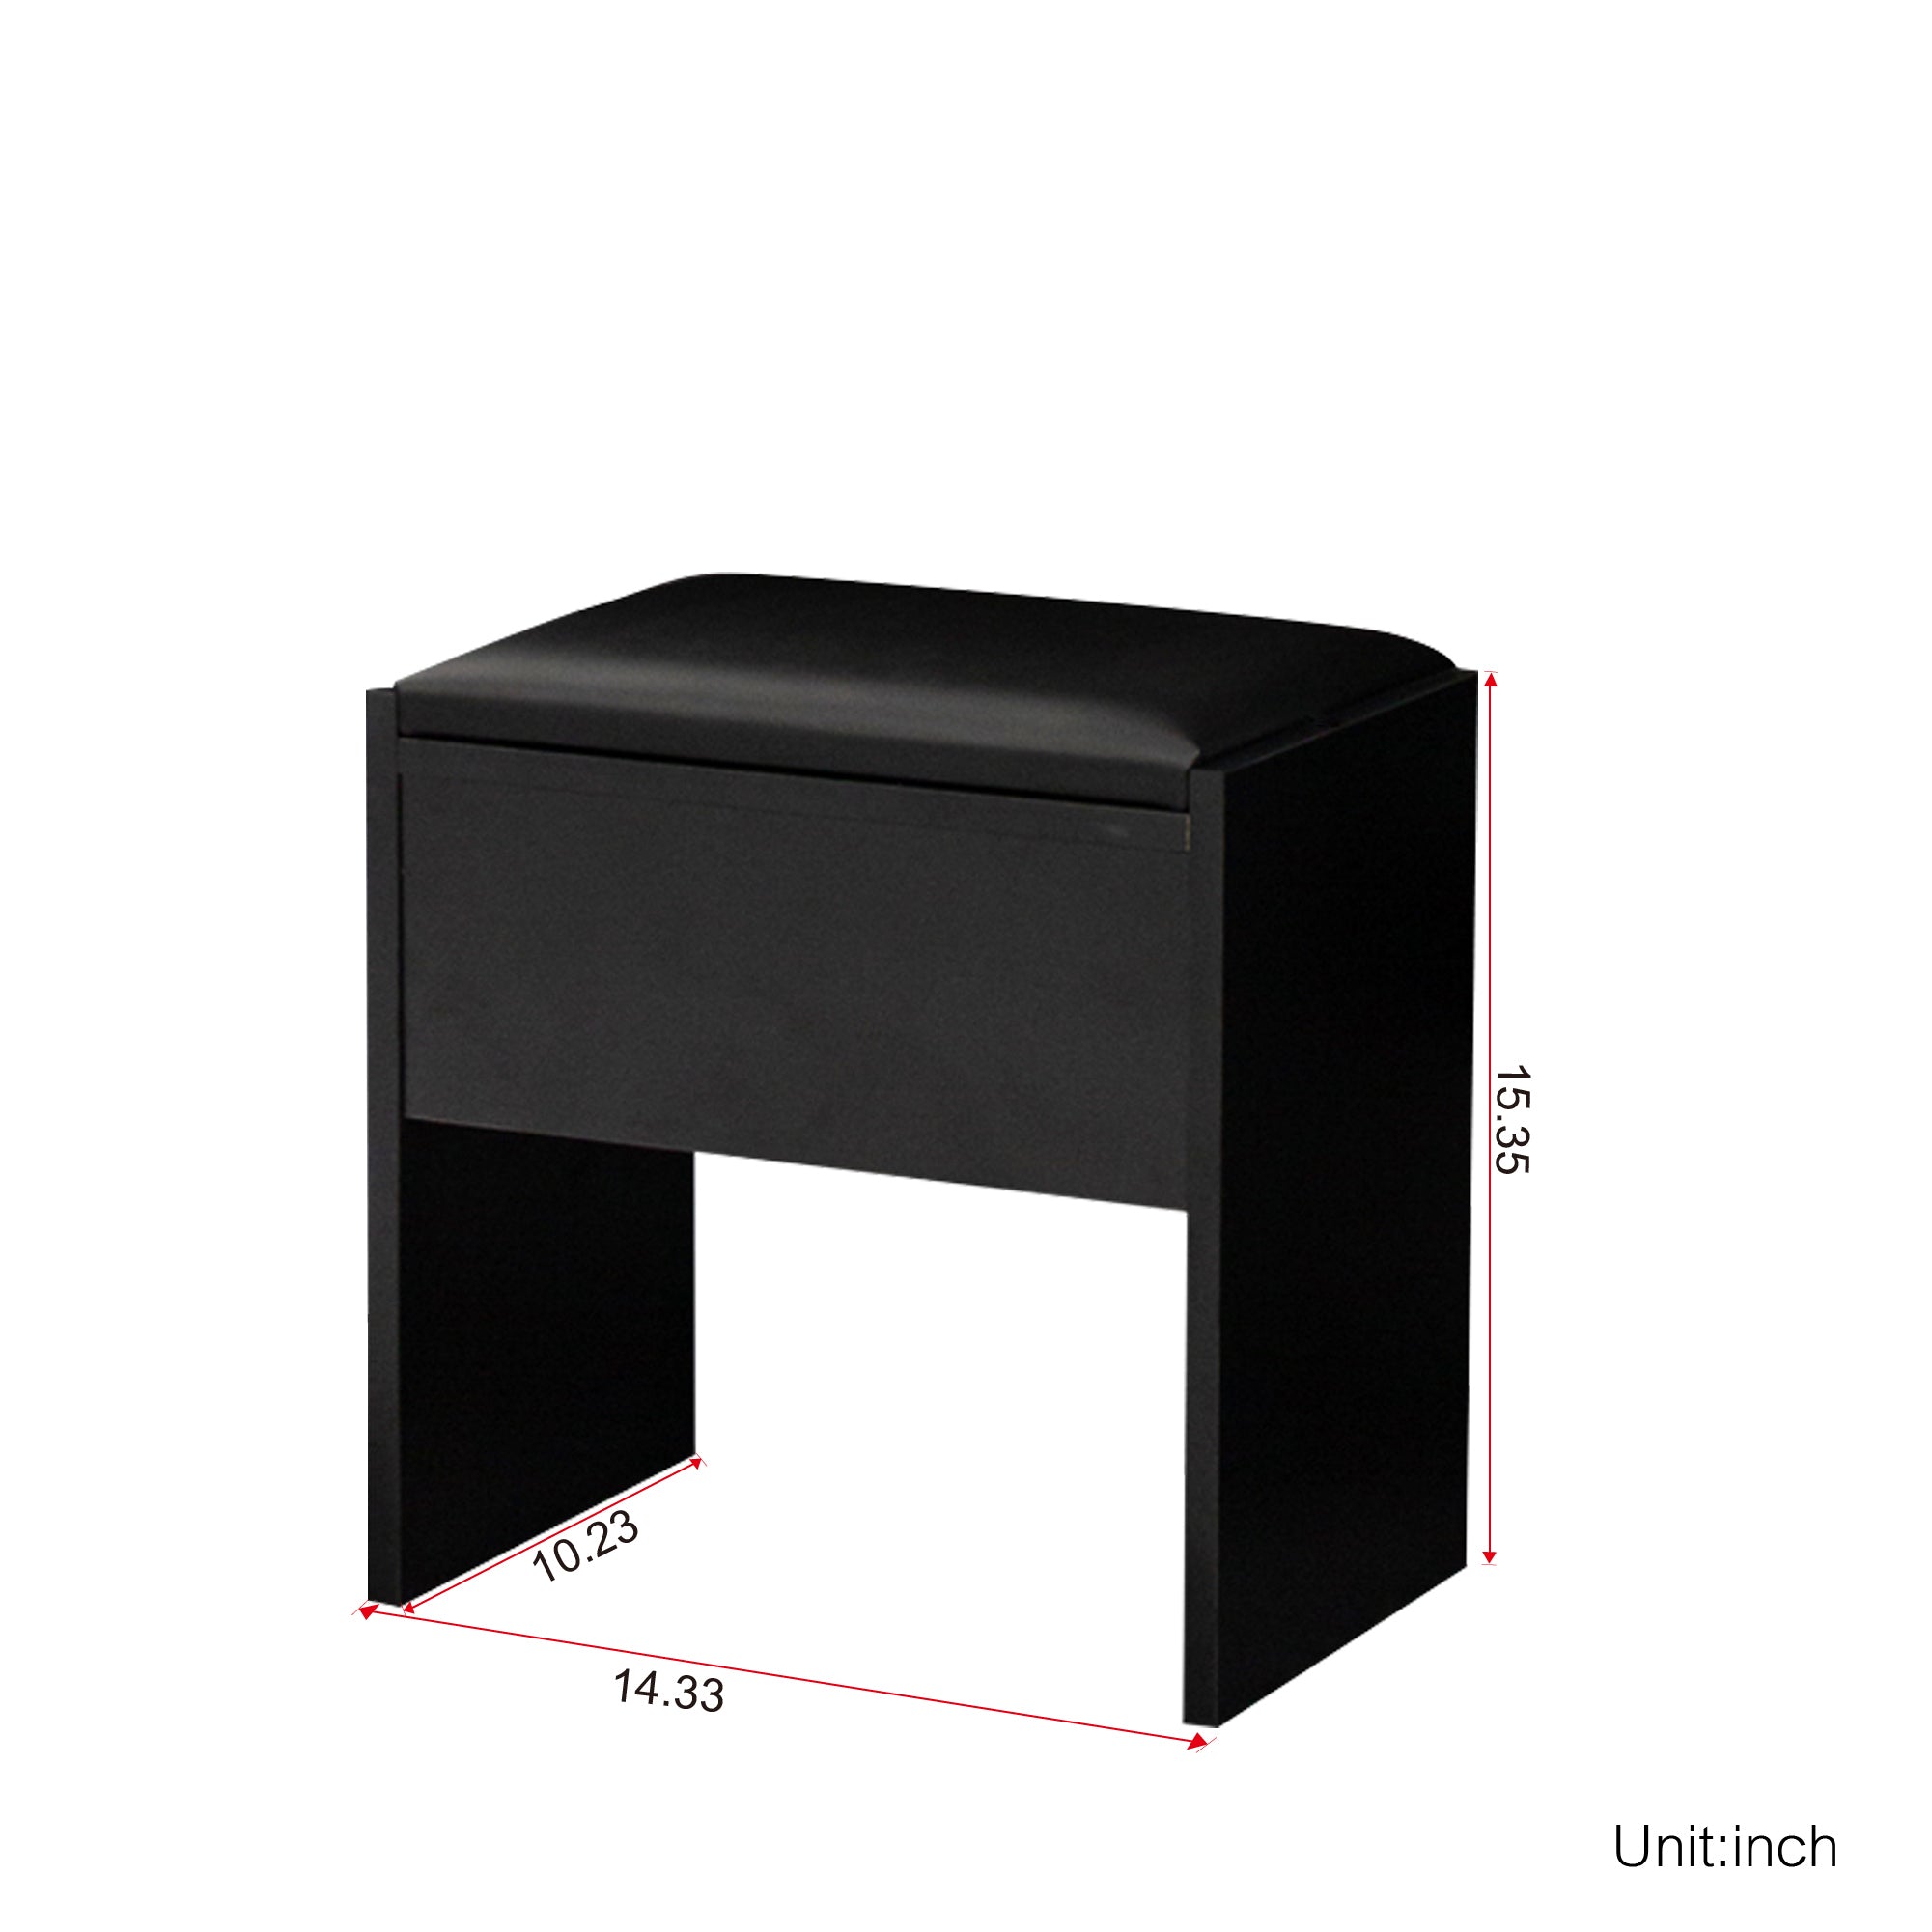 Dressing table with 1 Drawers, 1 cabinet (Black)